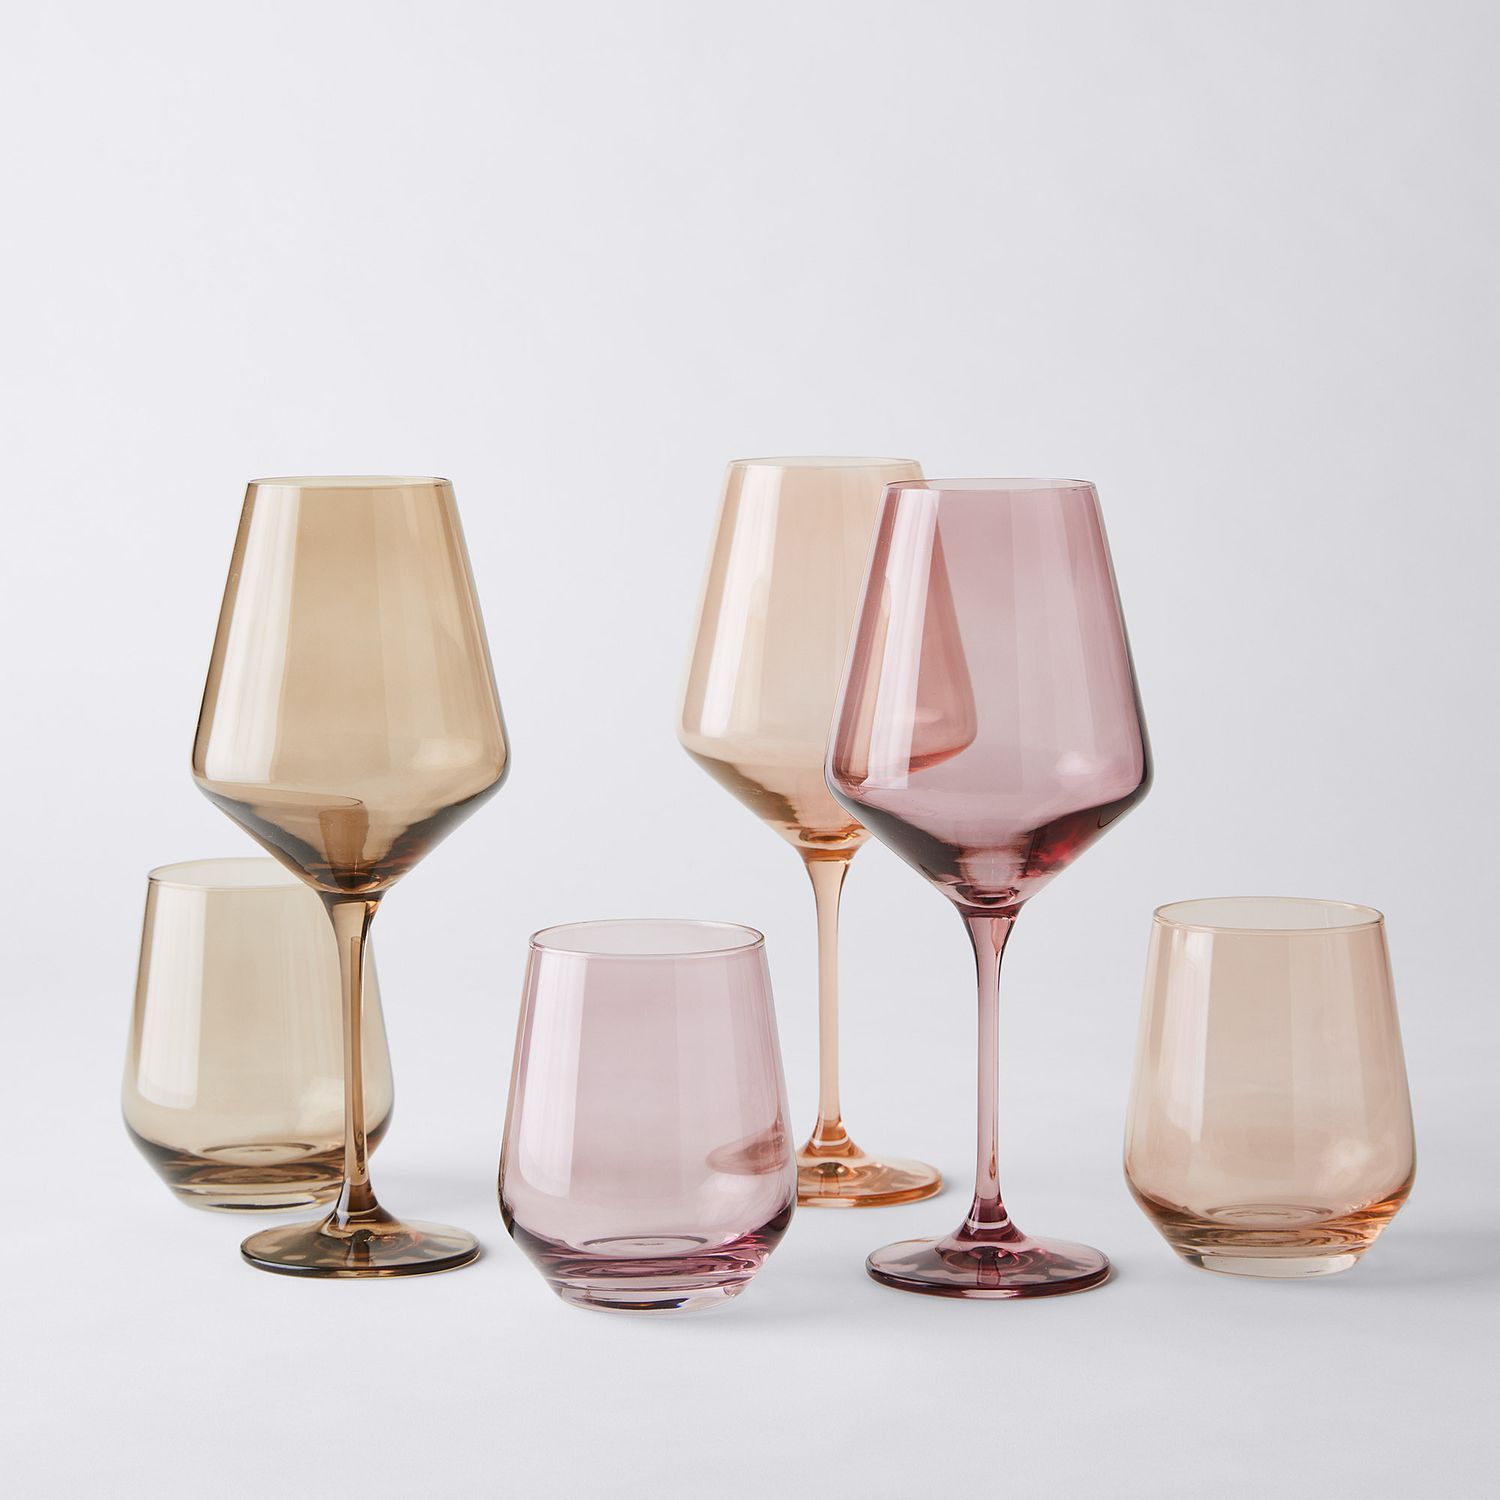 Estelle Hand-Blown Colored Wine Glasses (Set of 6) | Food52